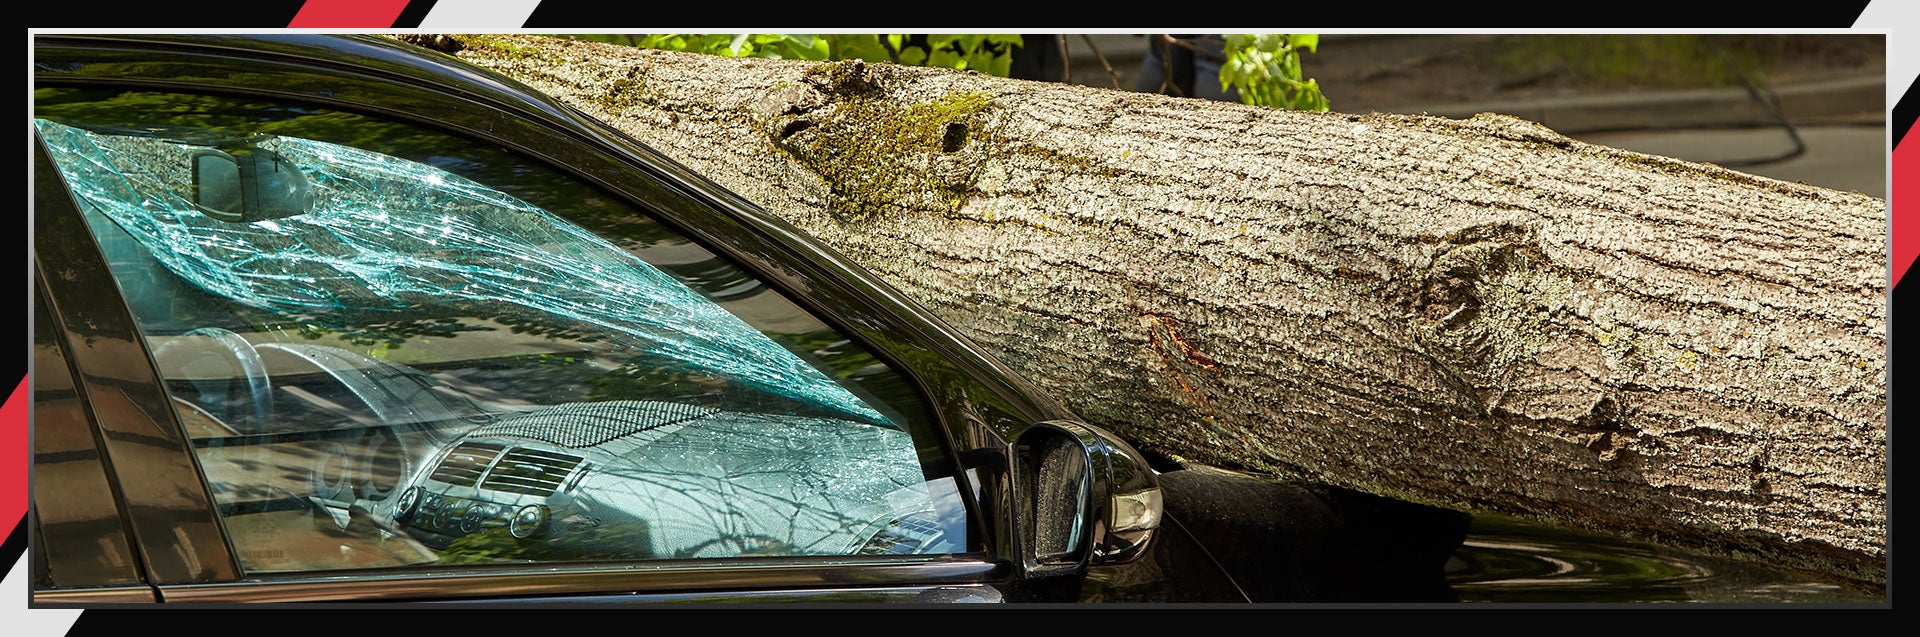 Does Car Insurance Cover Natural Disasters